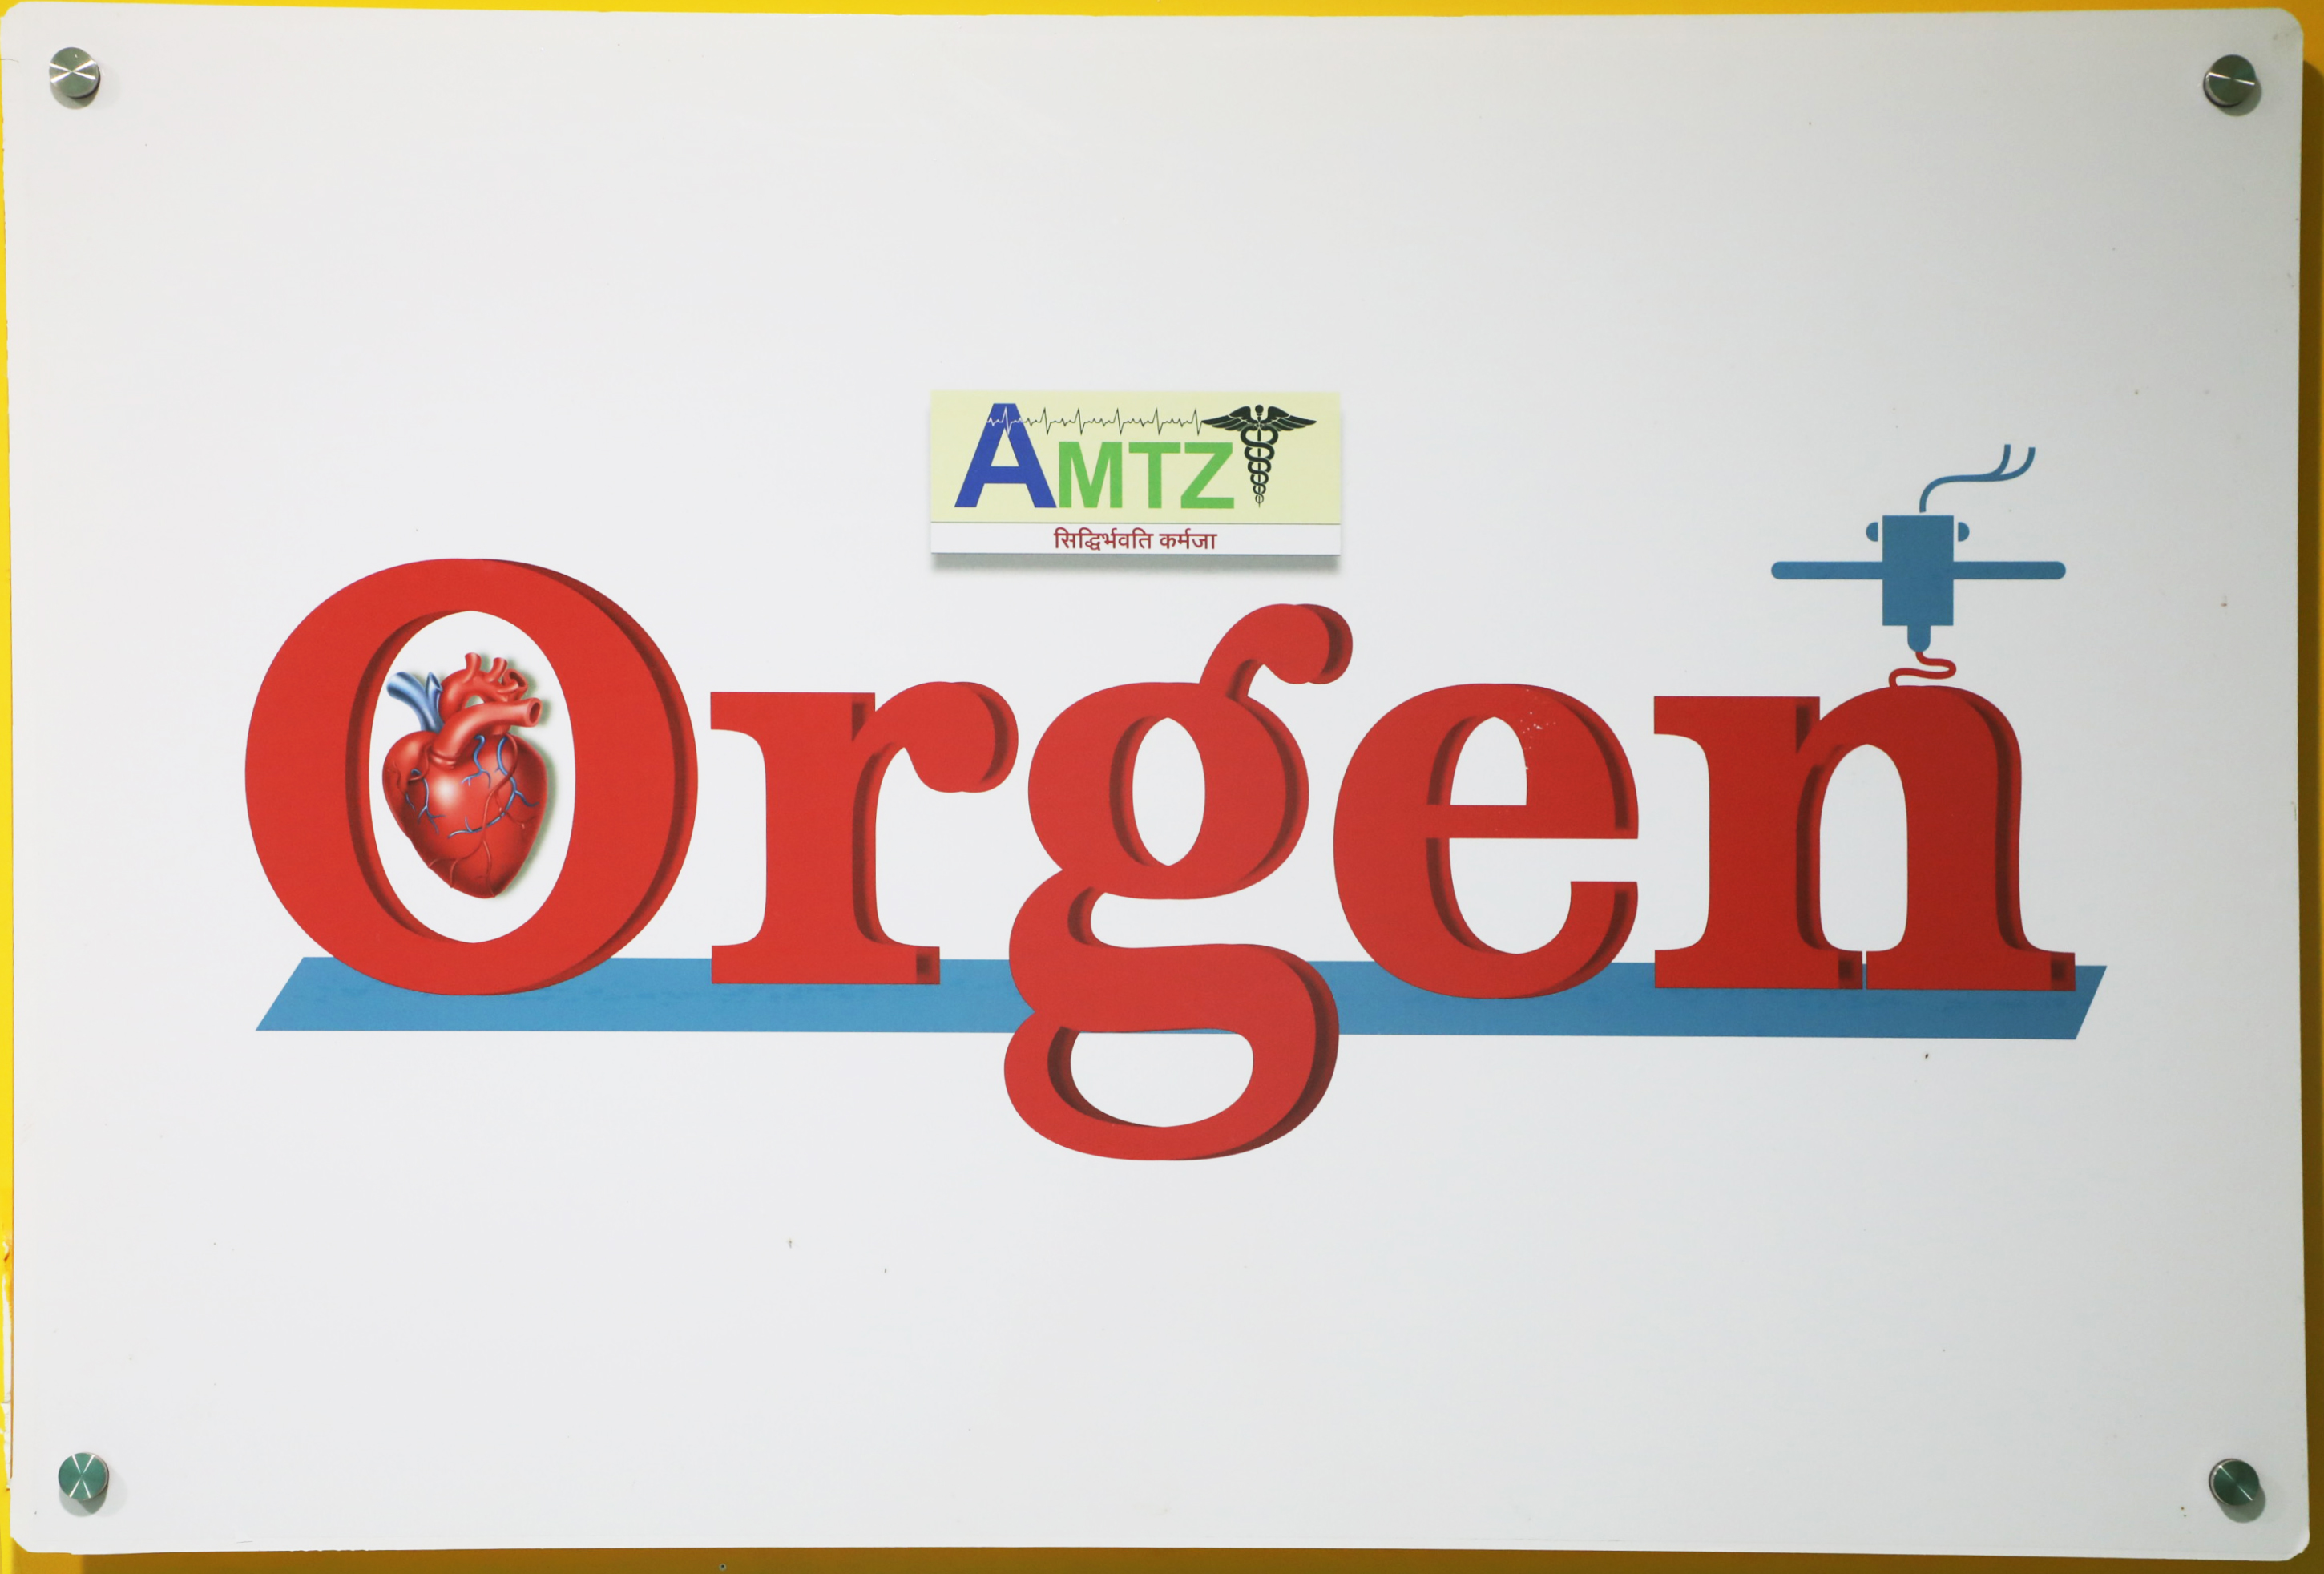 World of Organ Generation and regenerative medicine in amtz medical technology laboratory on nuclear medicine technology in India